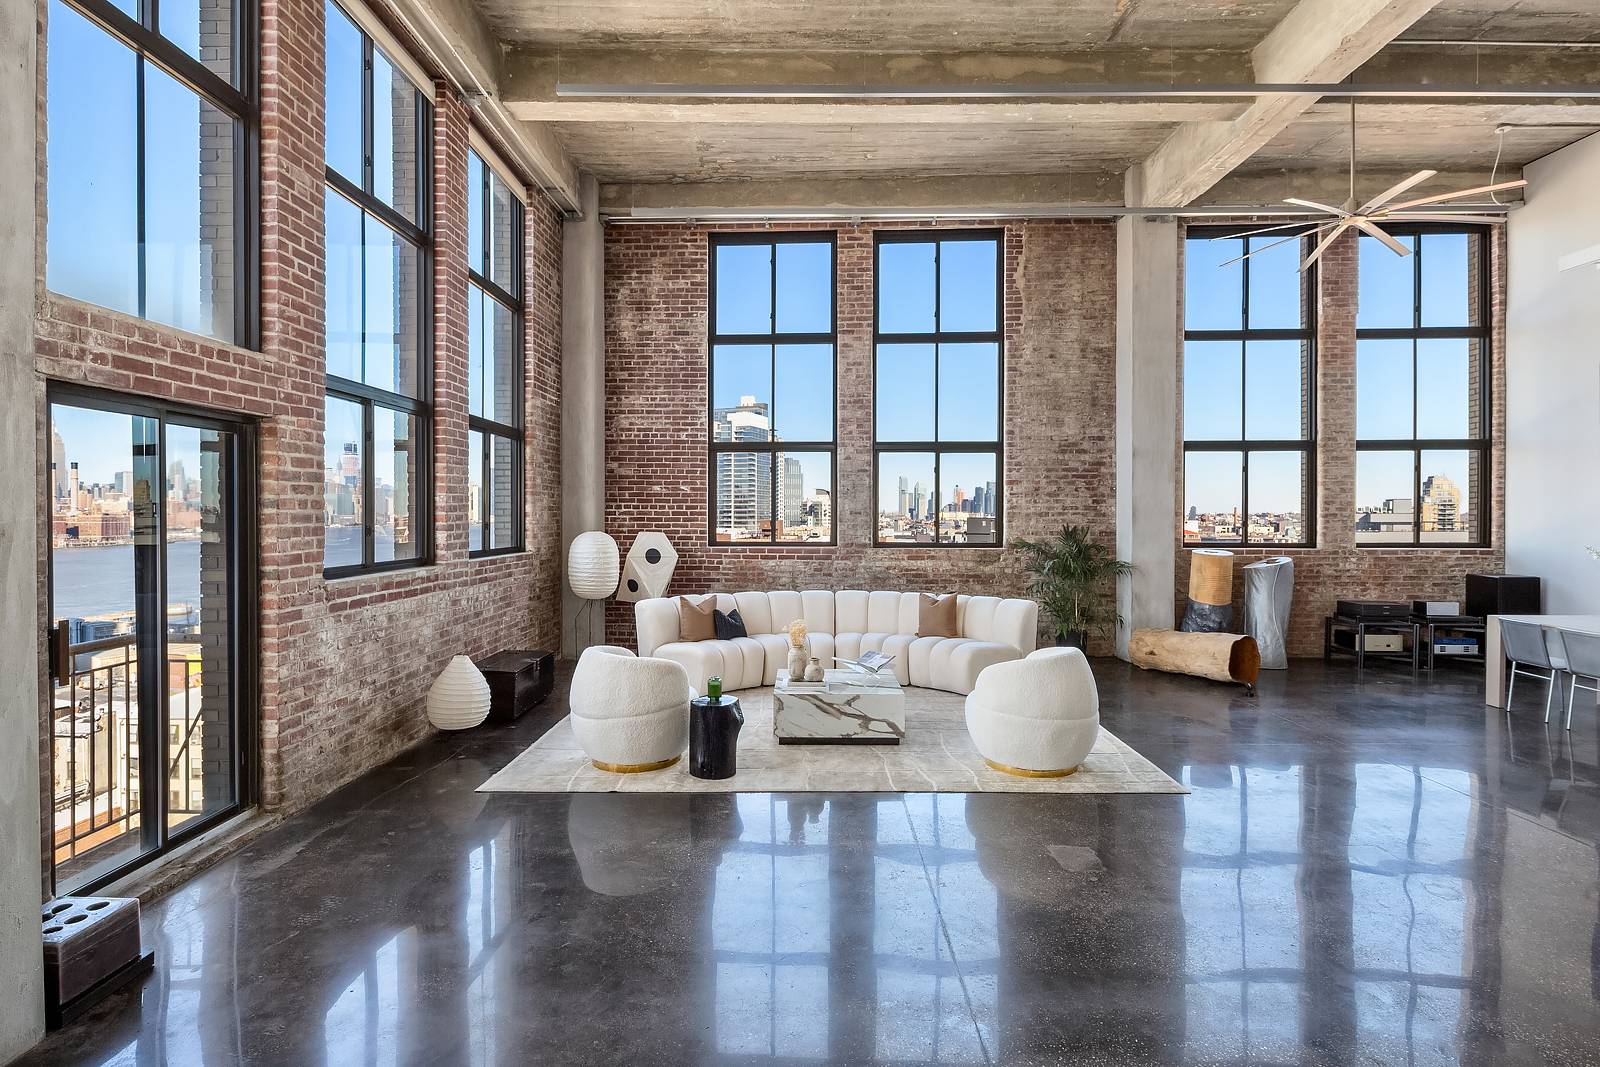 Gut Renovated Pre War Williamsburg Loft w Unobstructed Manhattan Skyline Views 18 foot ceilings, Japanese inspired primary loft suite, and high end finishes at the historic Esquire Building seconds from ...